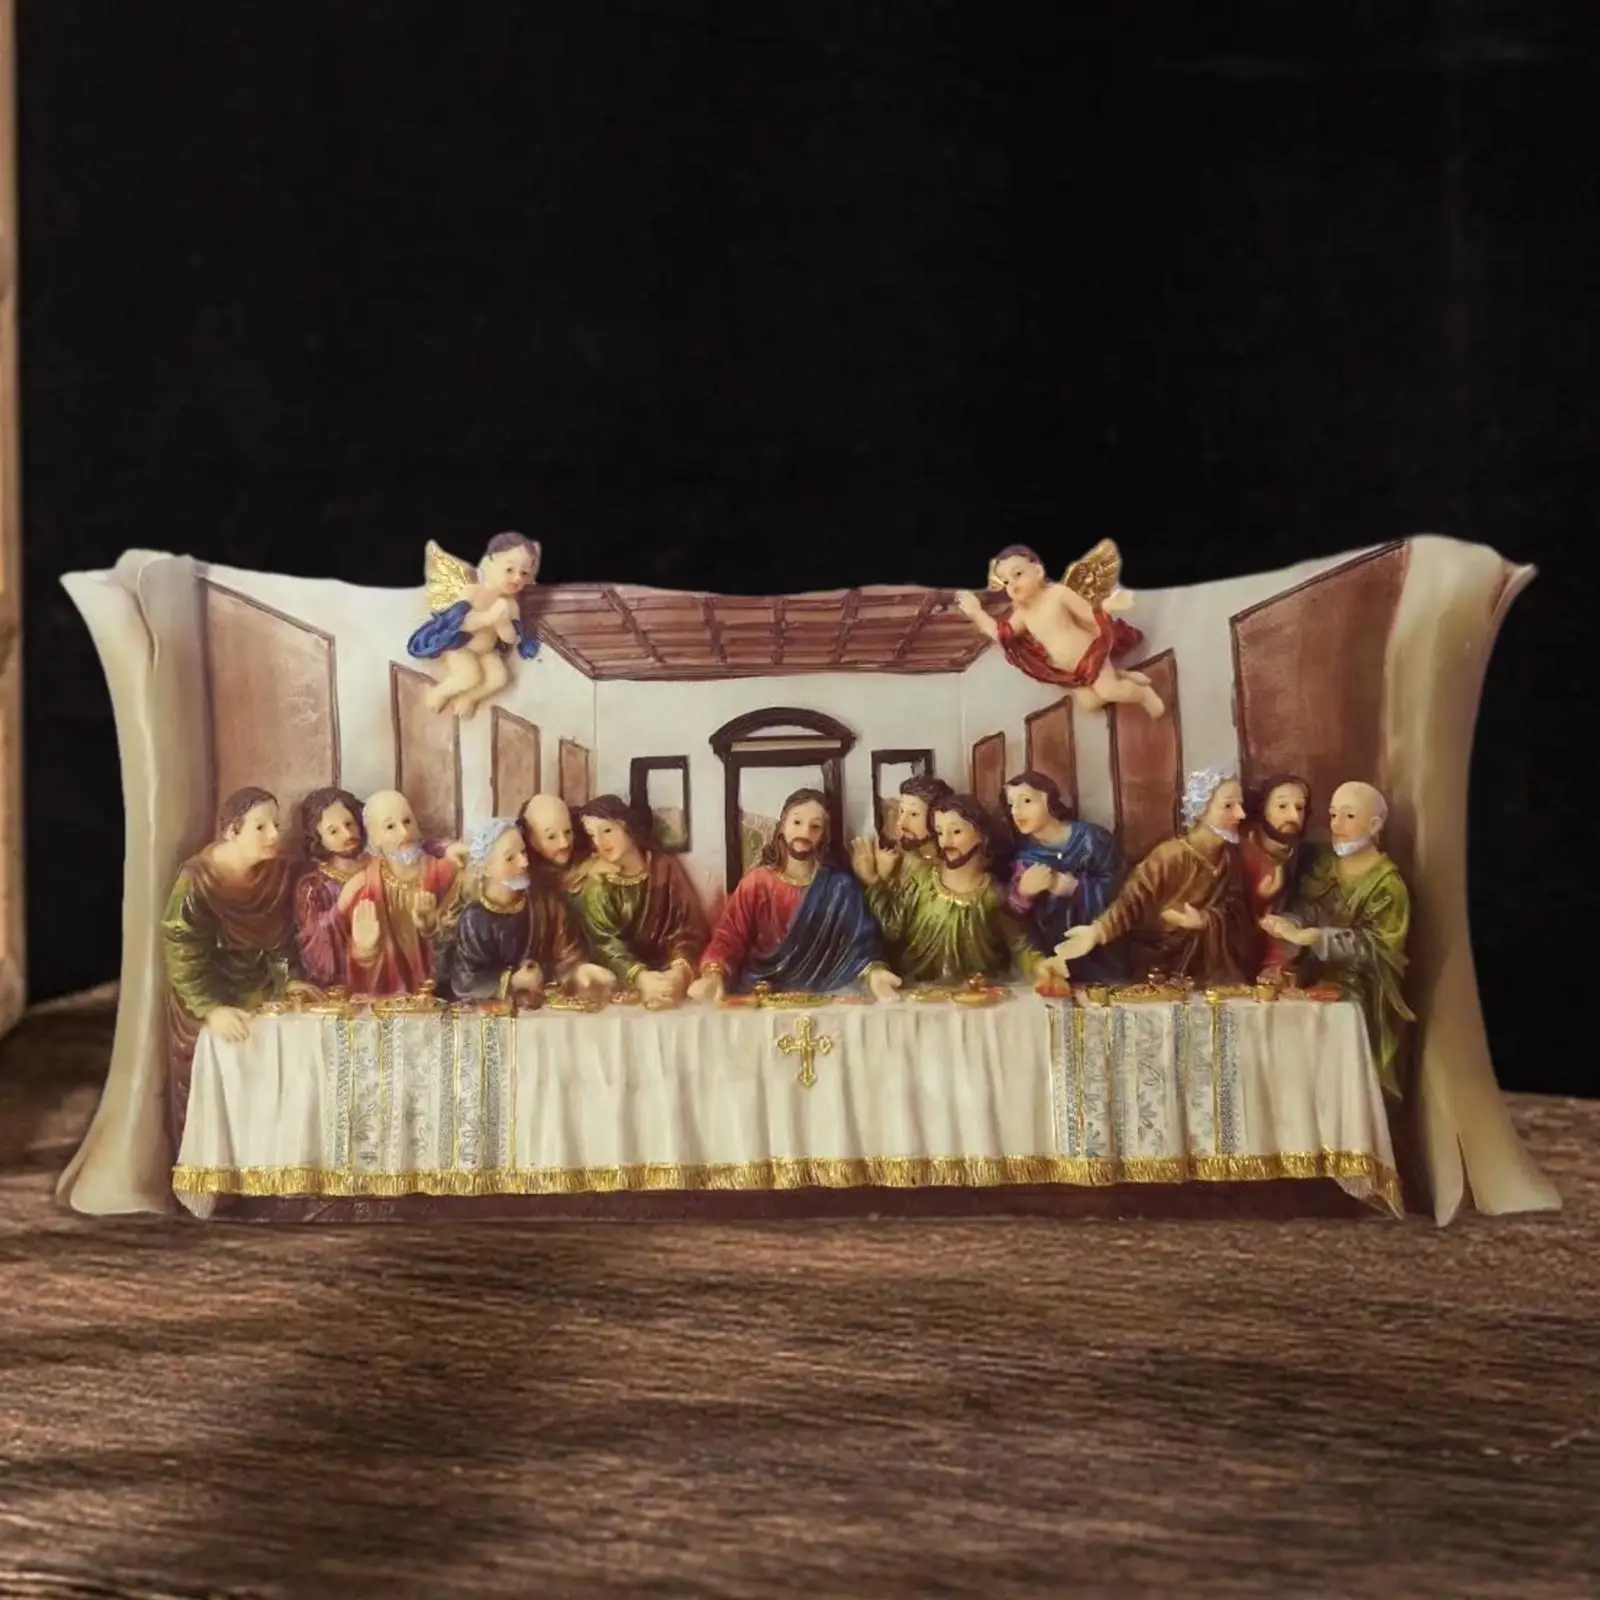 Resin Last Supper Statue Sculpture Desk Display Artwork Religious Statue Sculpture for Home Living Room Religious Gift Ornaments